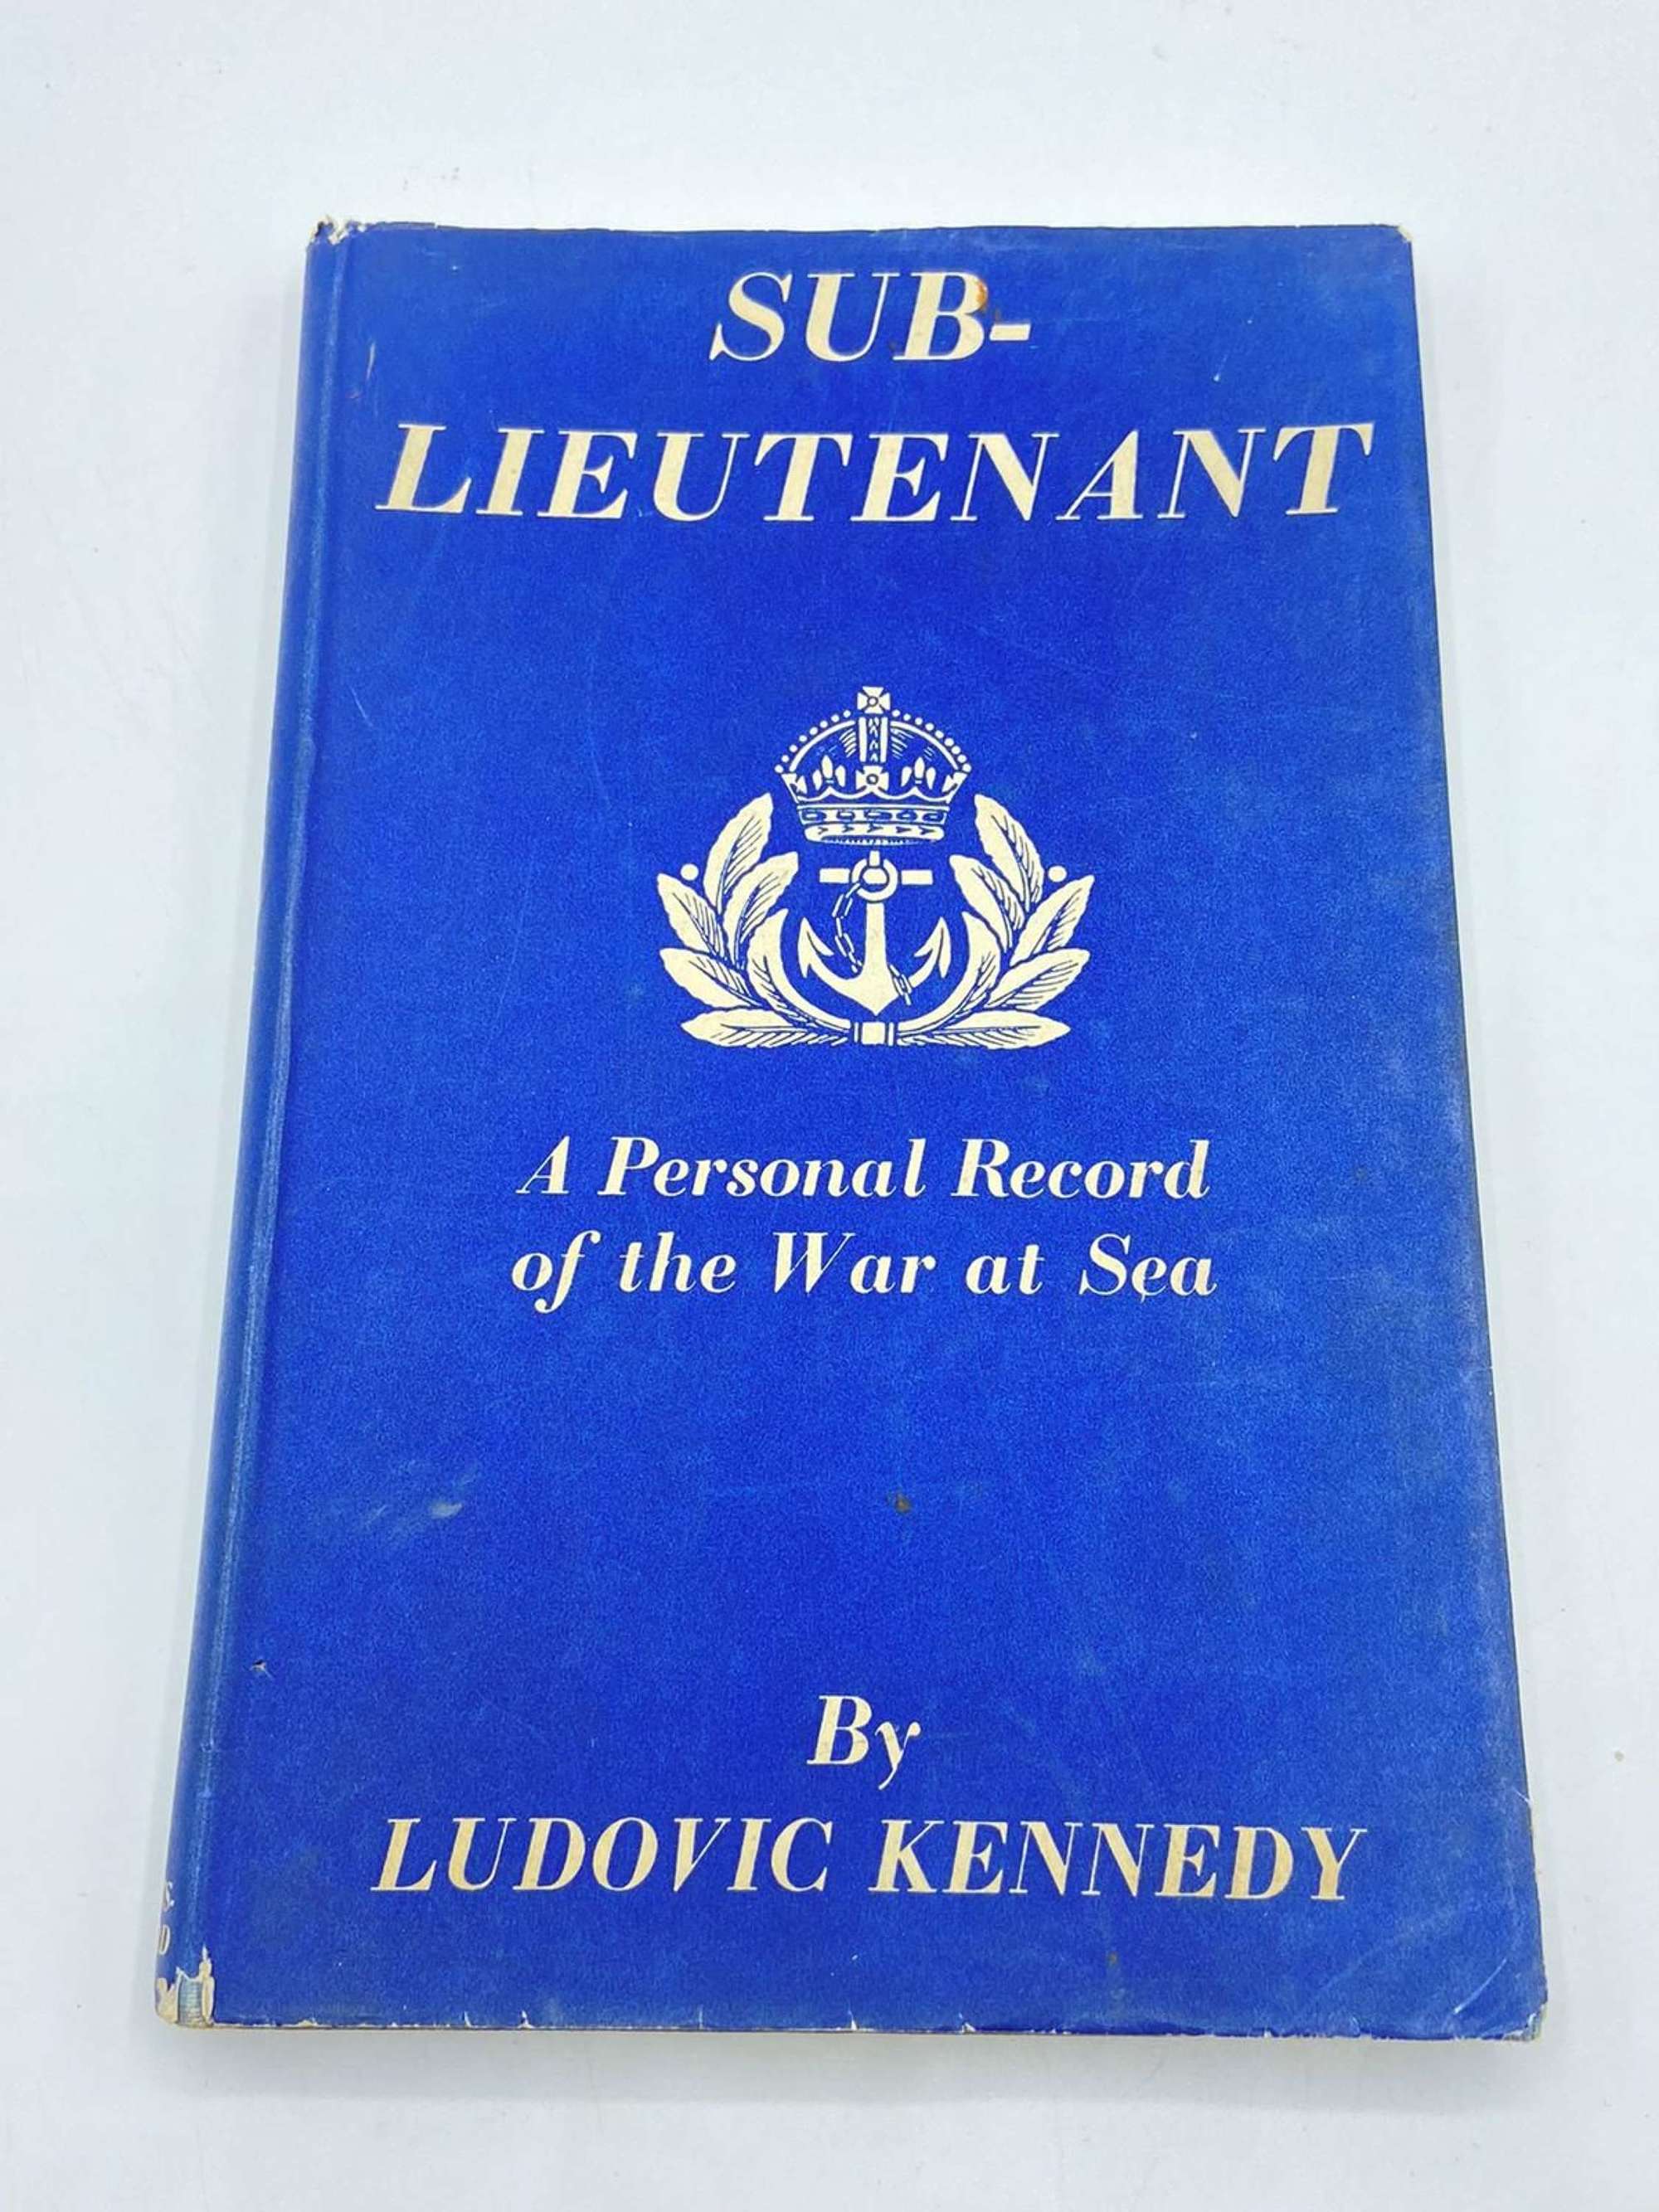 WW2 Lieutenant: A Personal Record of the War at Sea 1st Edition Book